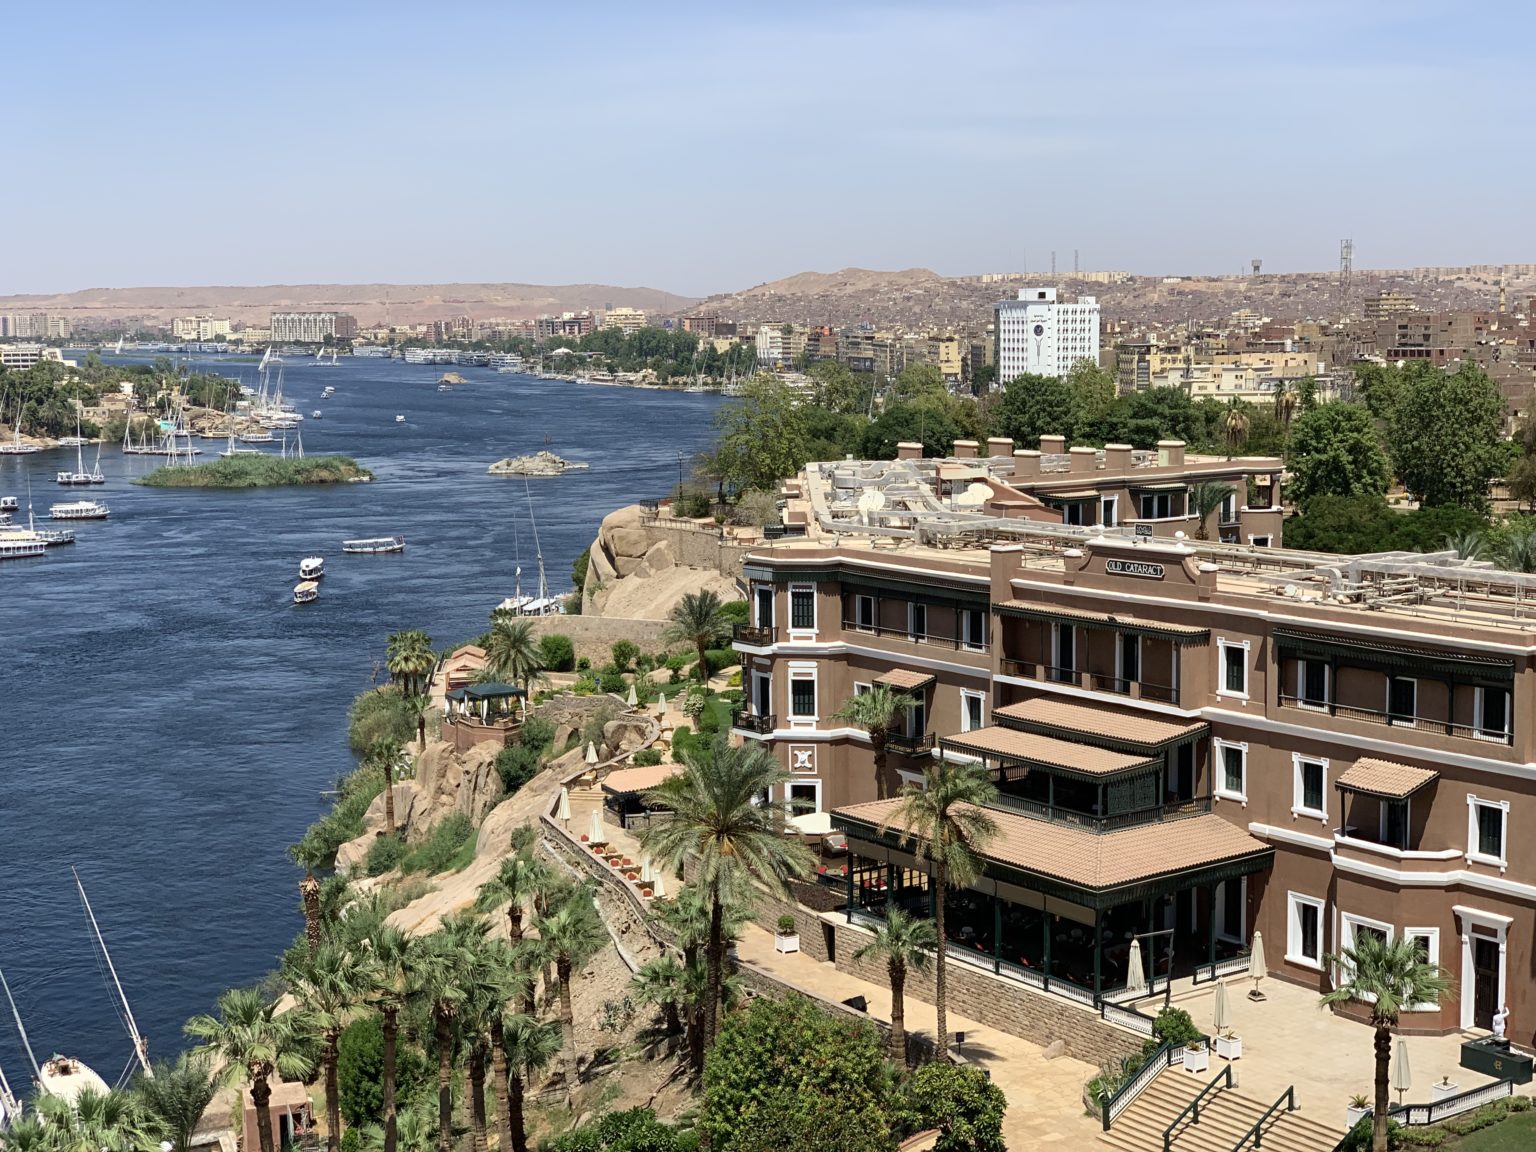 Aswan city and river view with Old Cataract Hotel